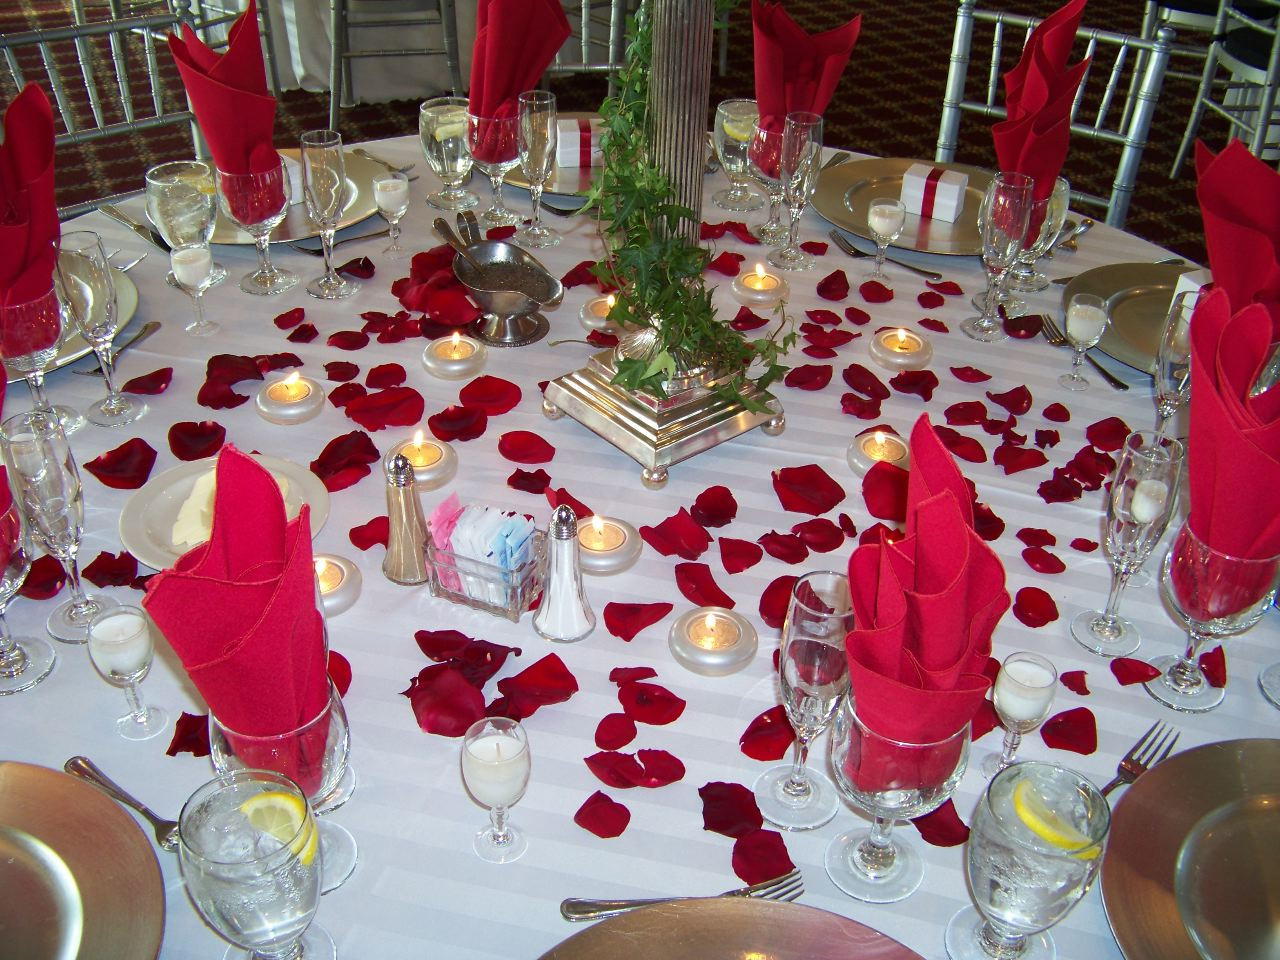 How To Decorate A Wedding Table
 Home Decor Tips Wedding Reception Decorations with Balloons